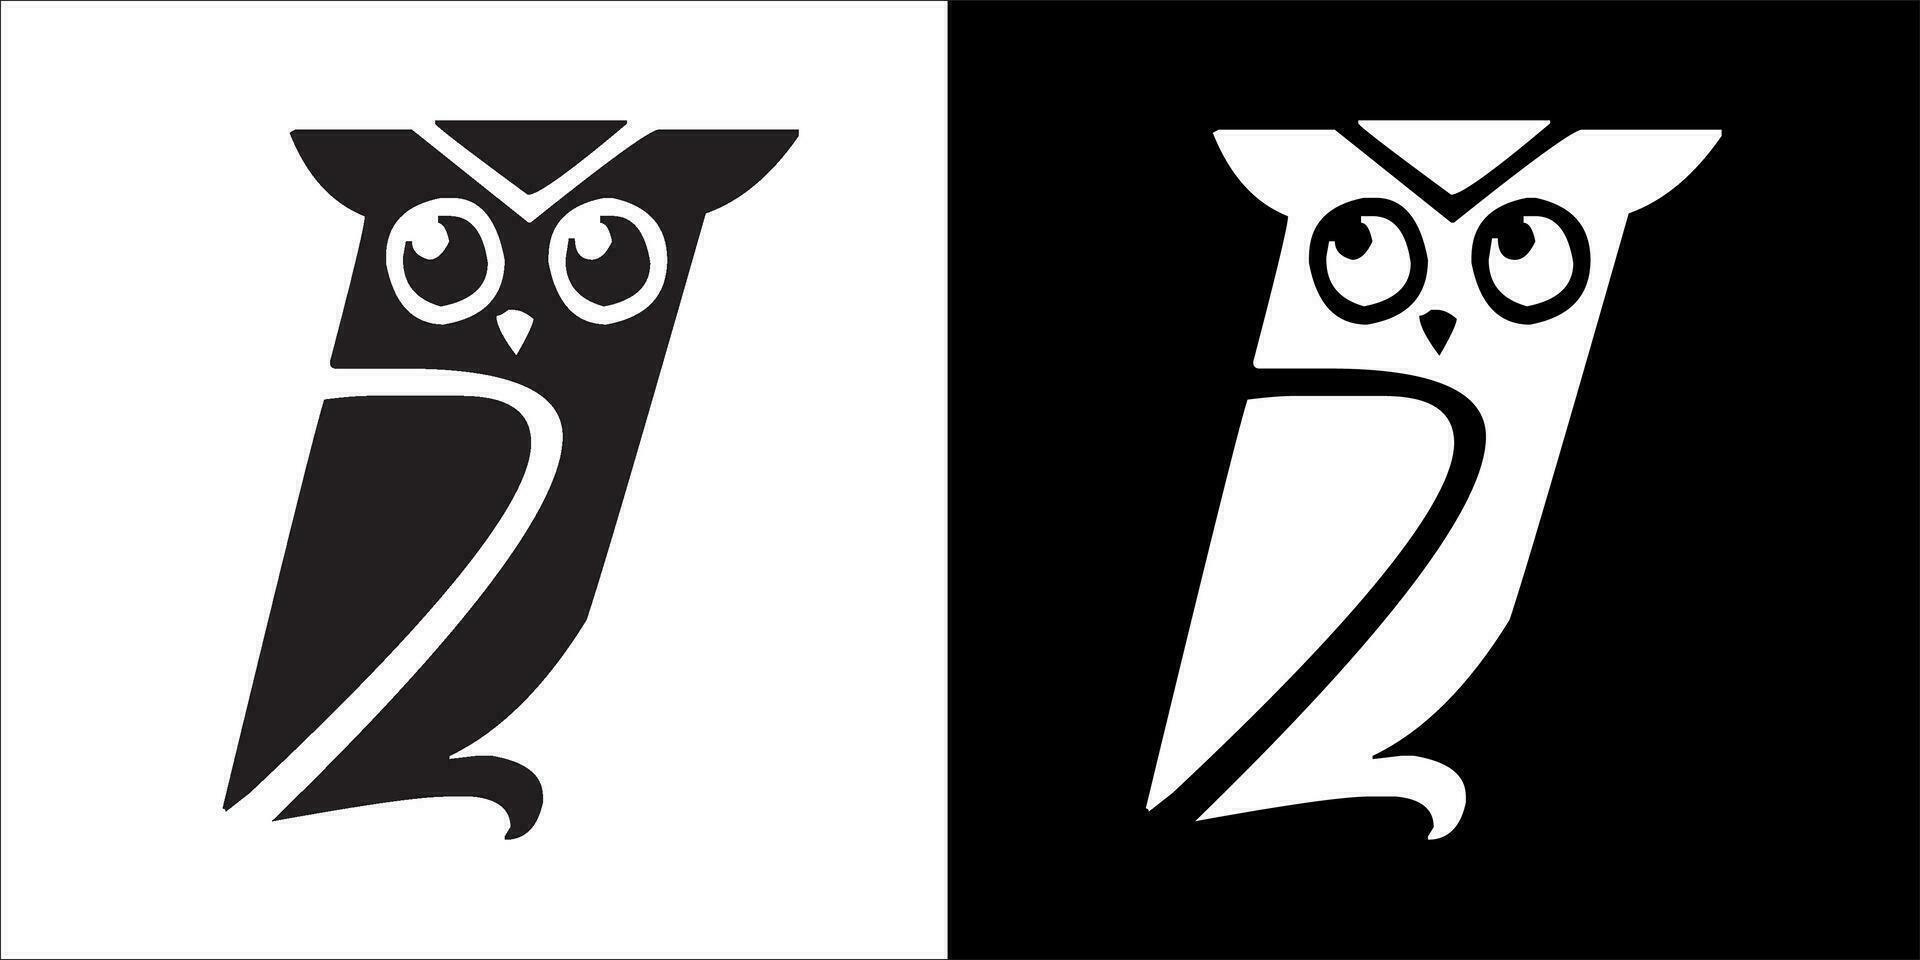 illustration, vector graphic of owl icon, in black and white, with transparent background